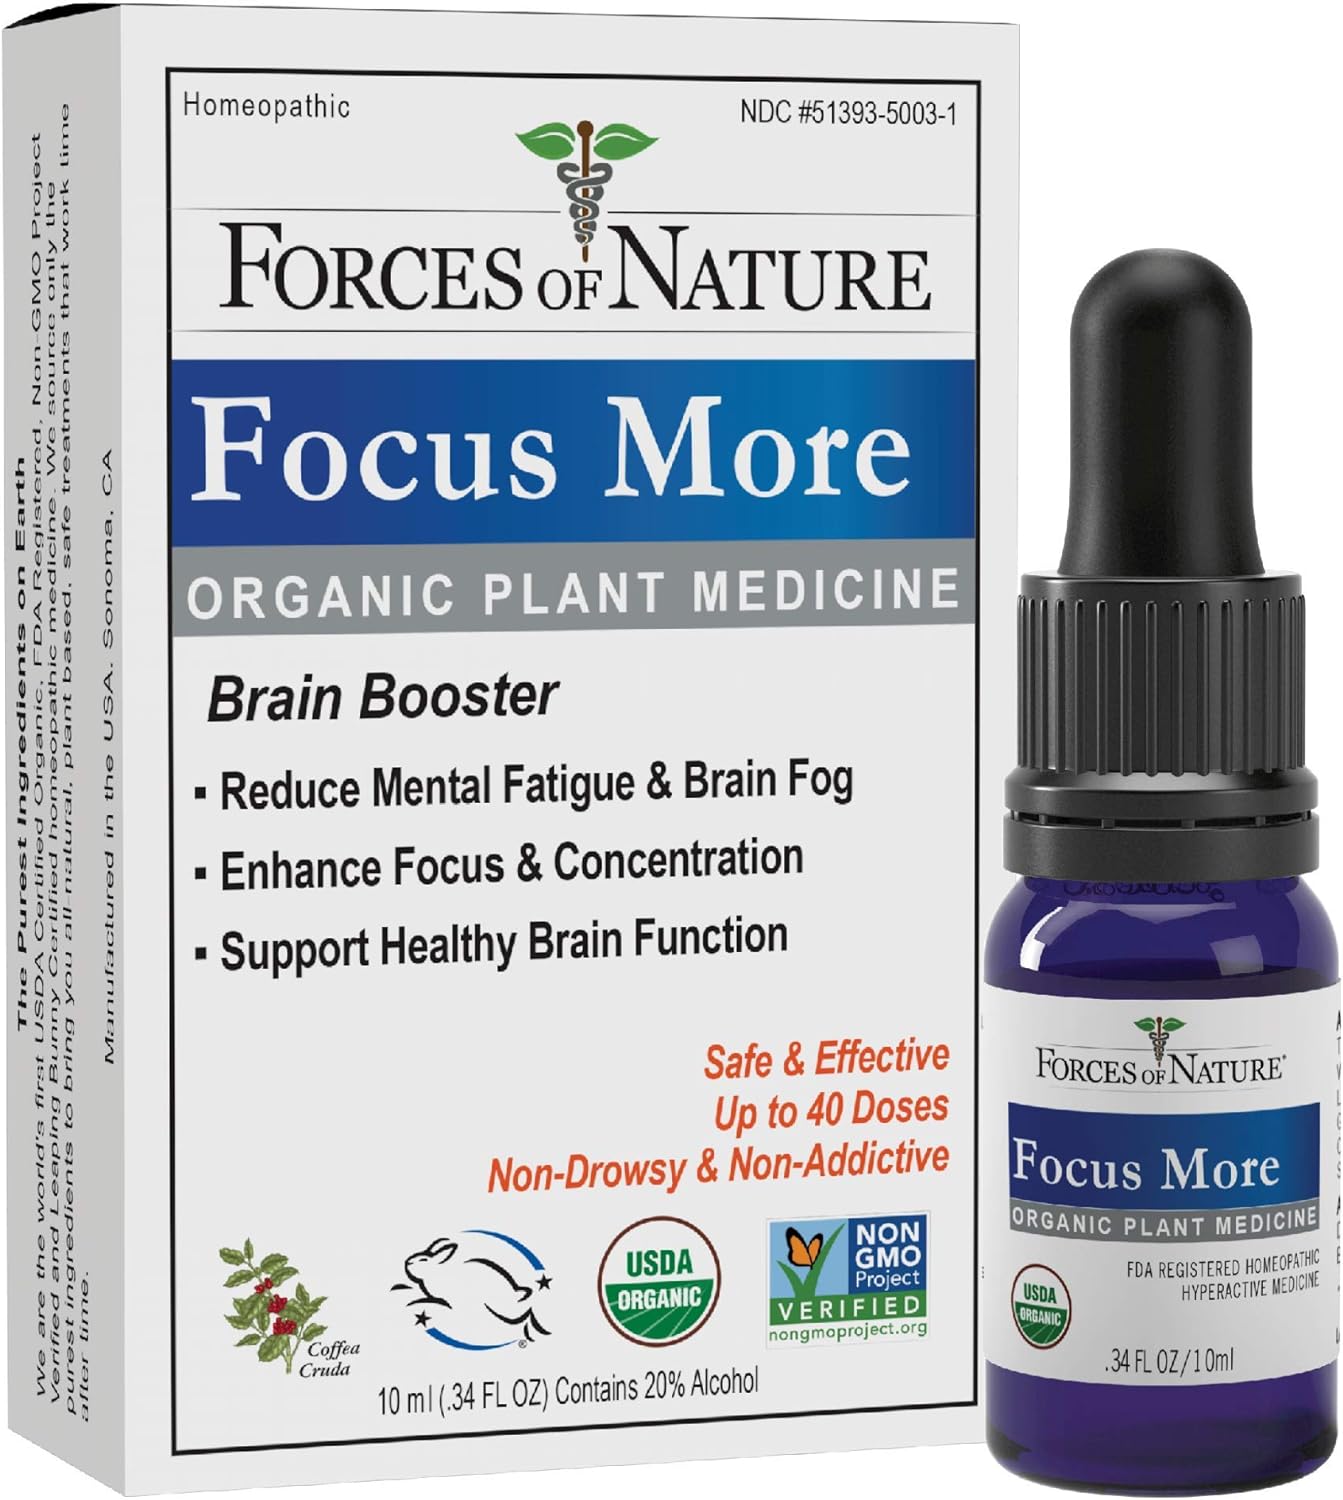 Forces of Nature Focus More Review